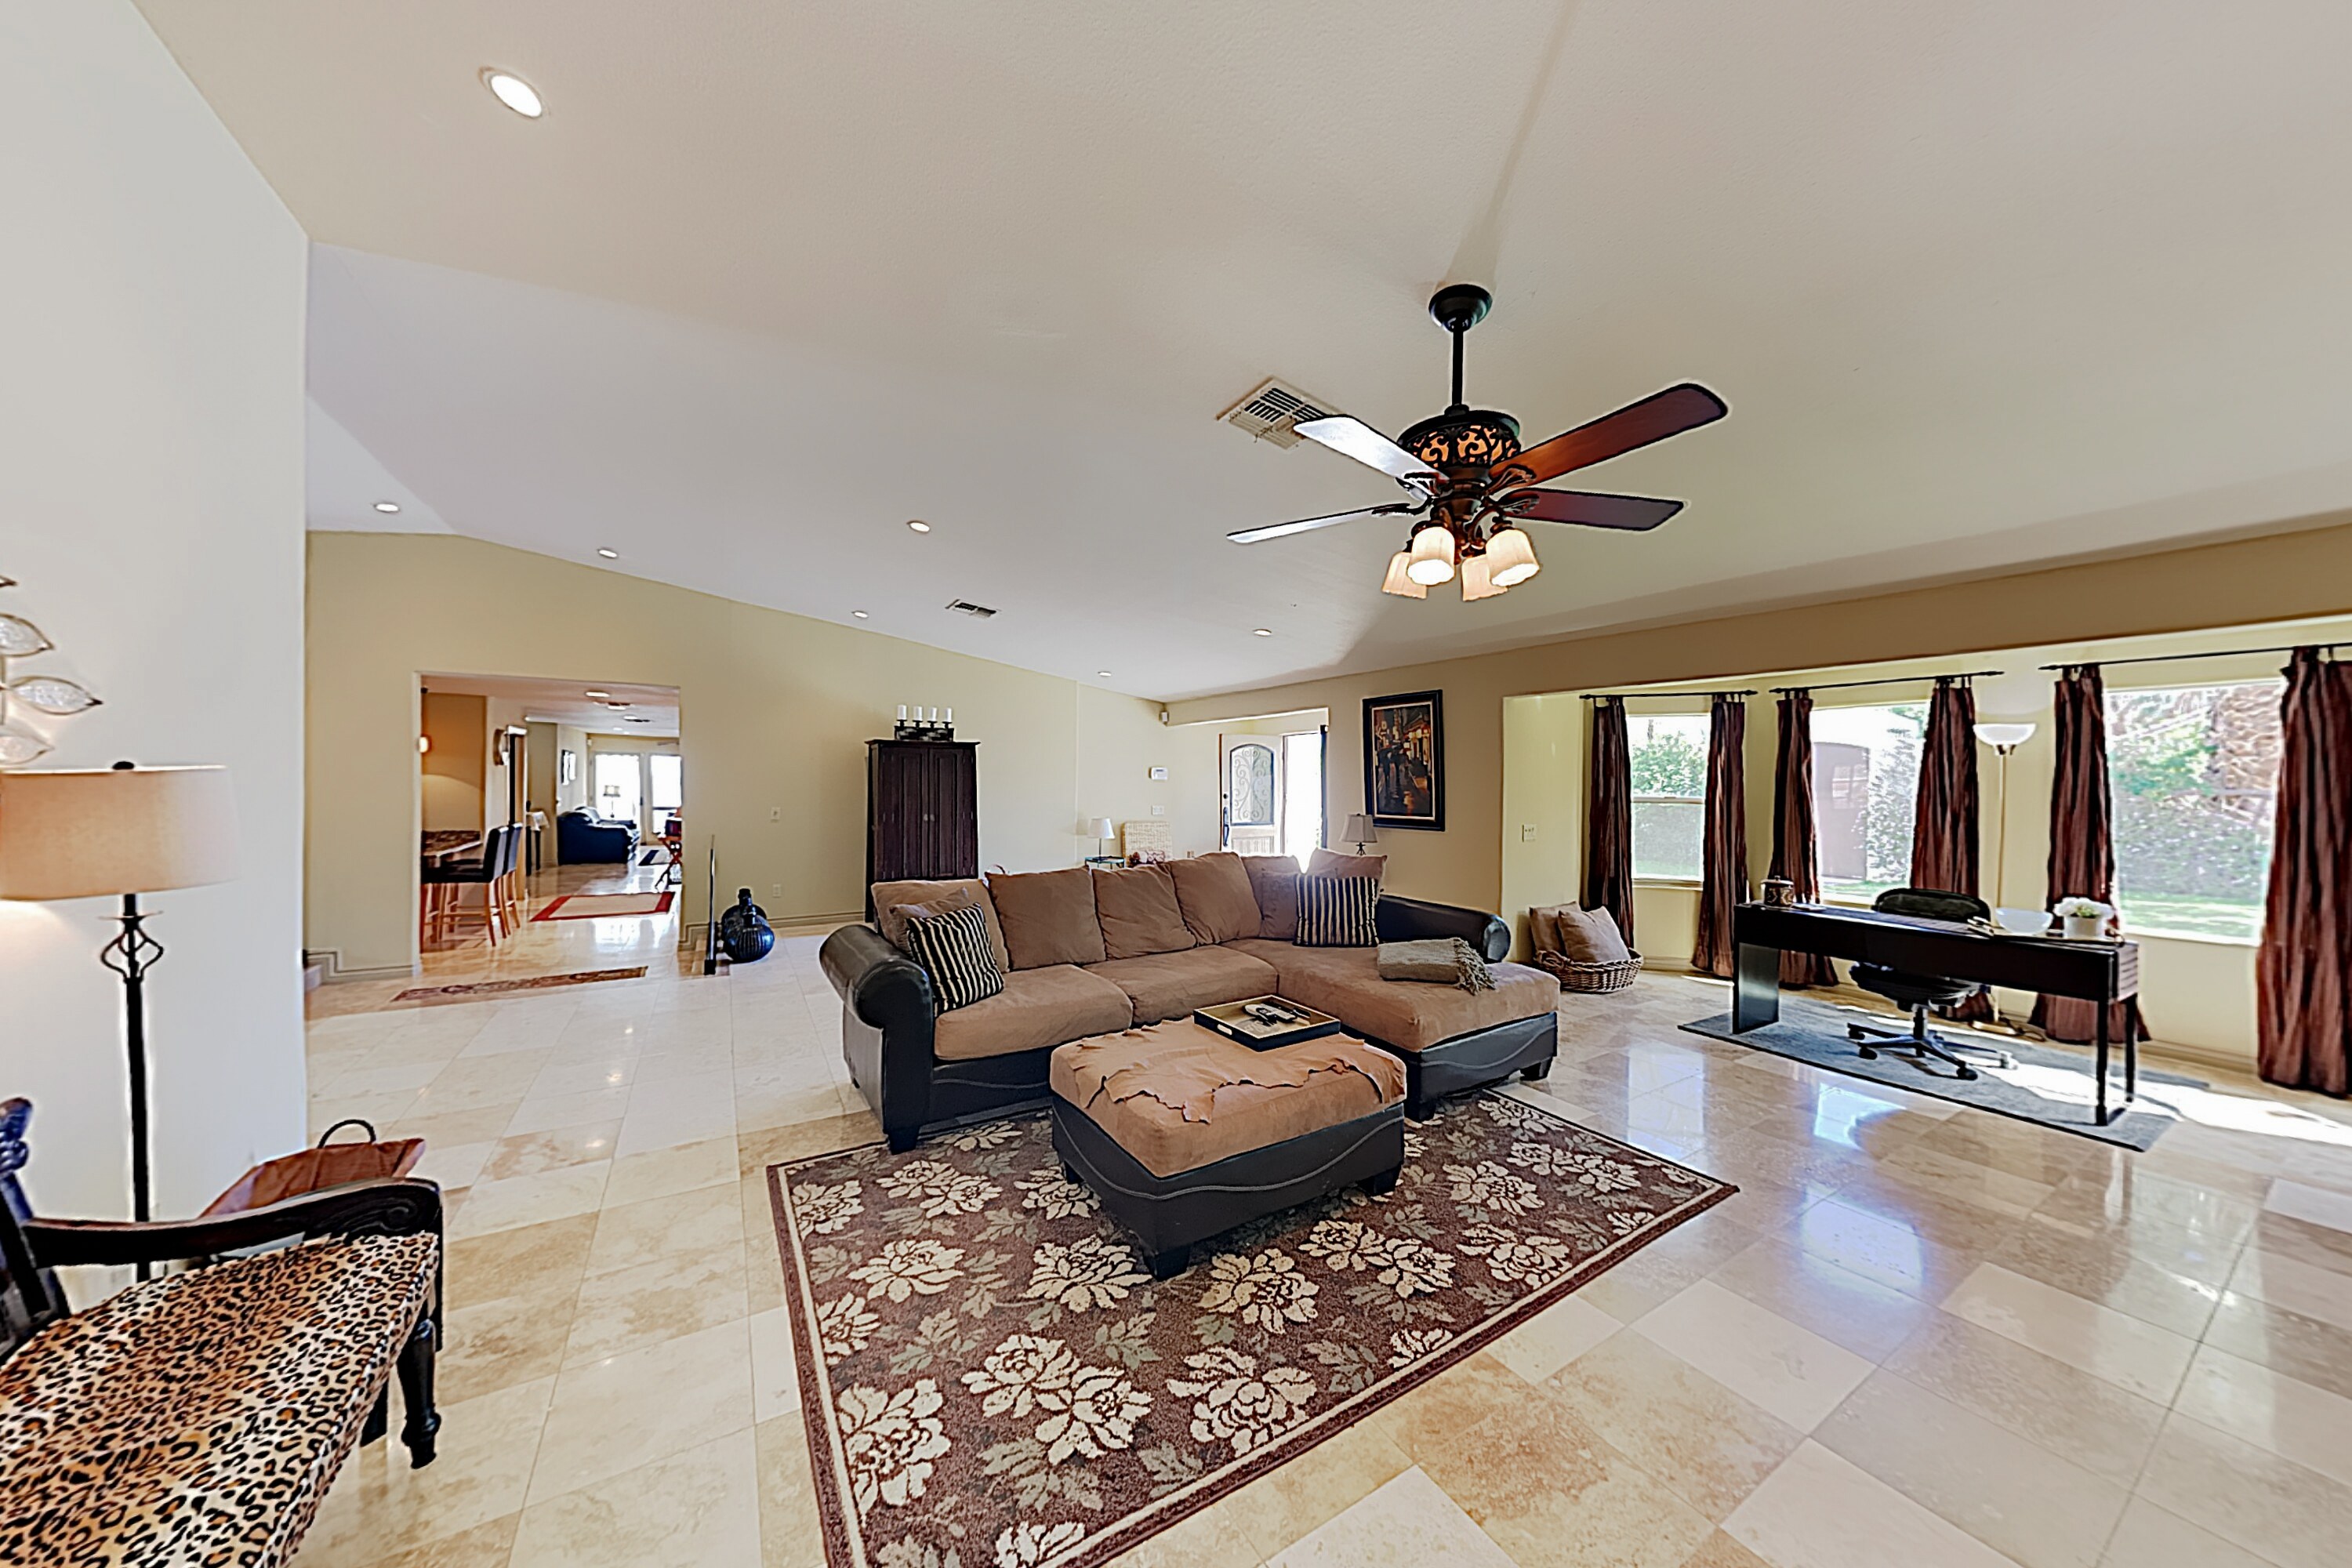 Travertine flooring lines the airy Great Room, furnished with a sectional and a desk.